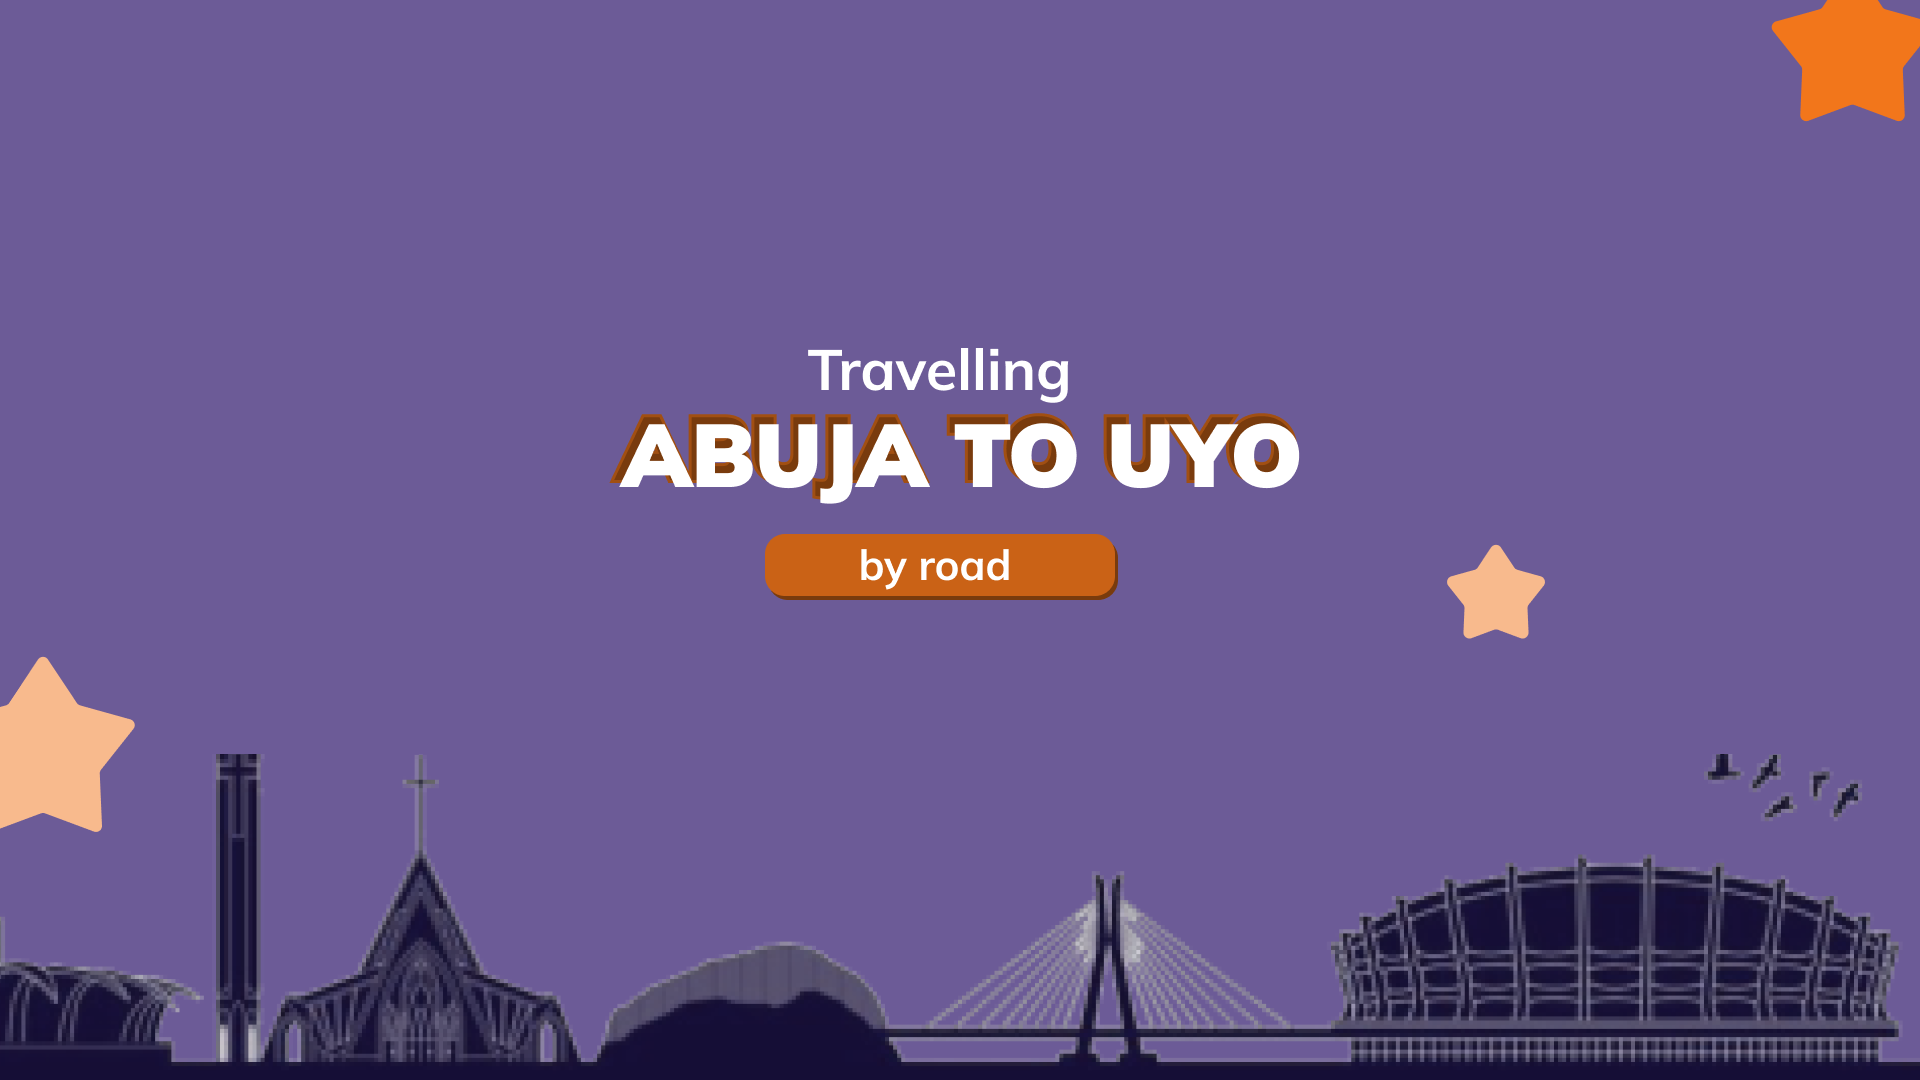 Abuja to Uyo by road